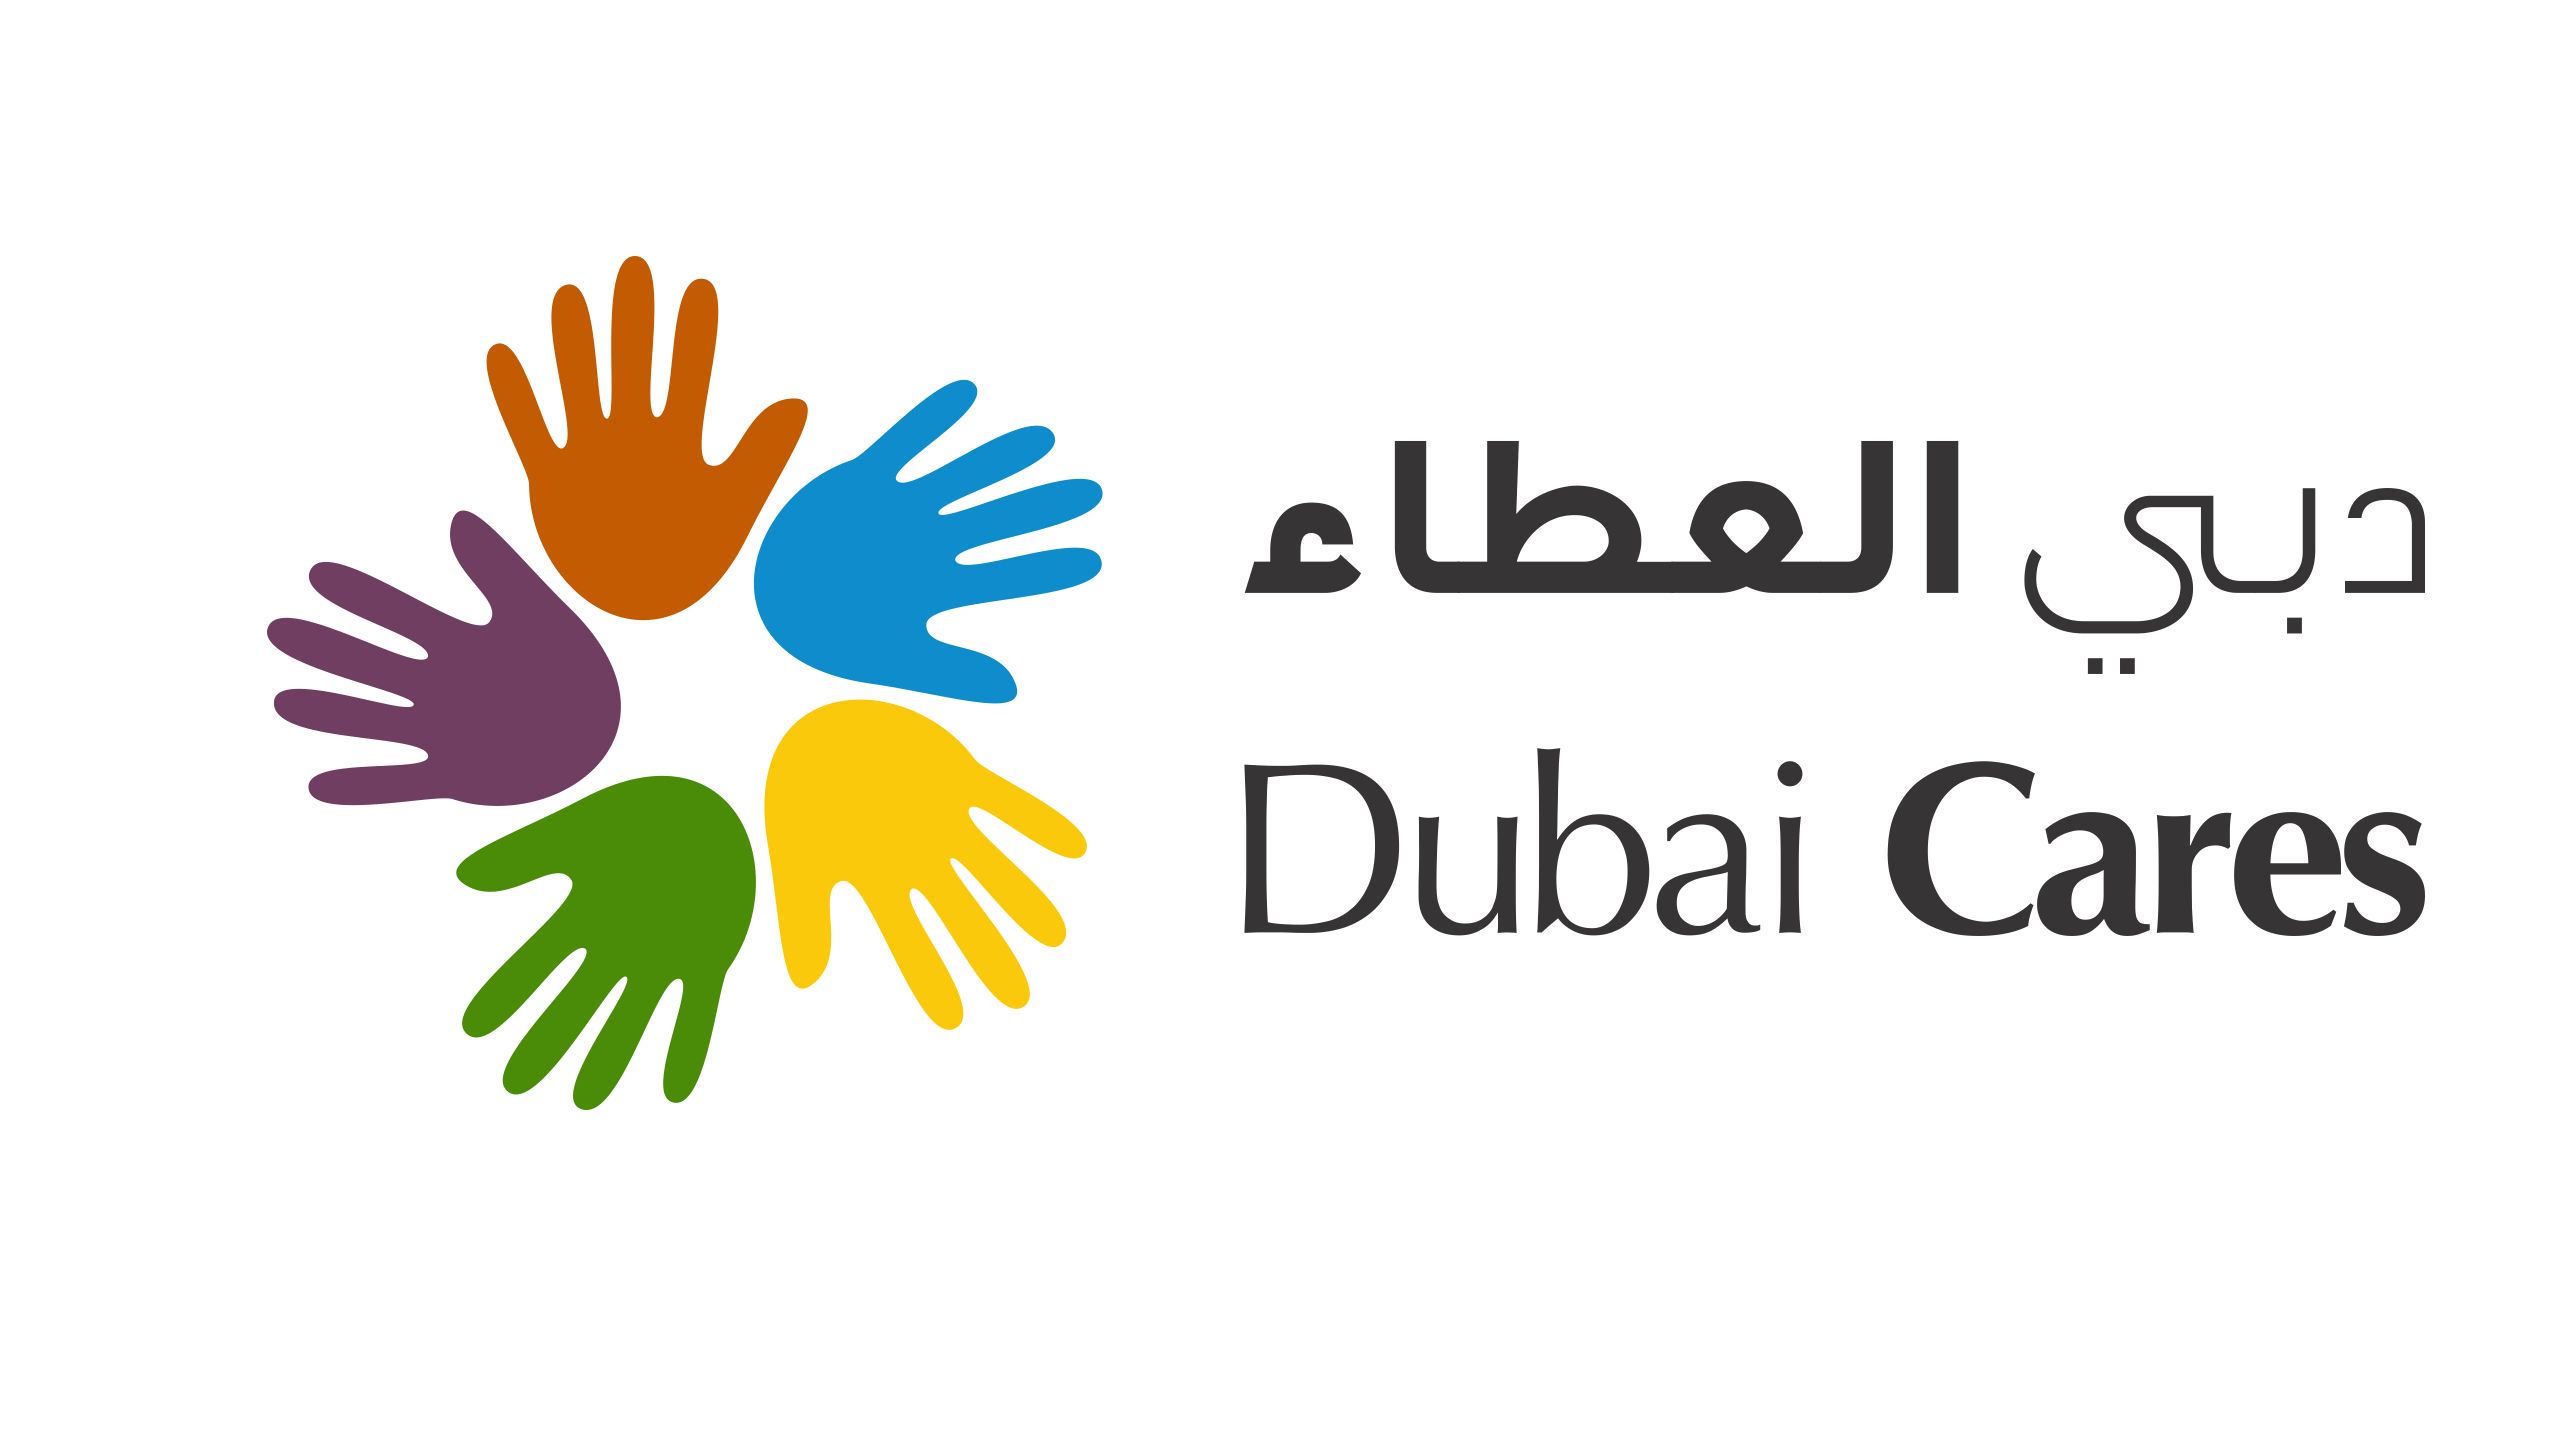 Report: ‘Dubai Cares’ stays committed towards global education initiatives amid pandemic